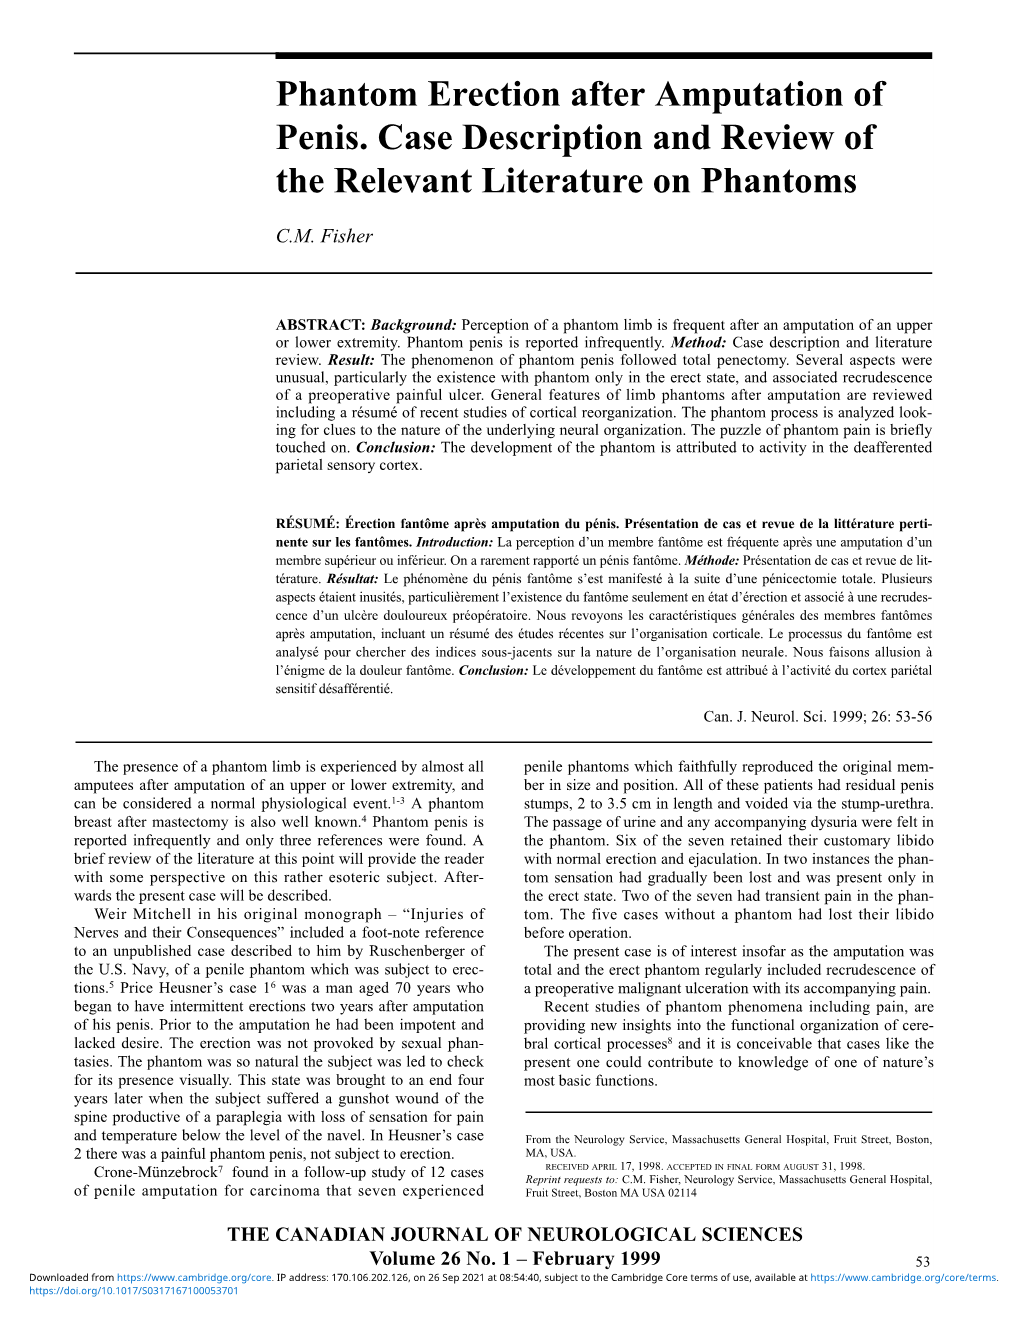 Phantom Erection After Amputation of Penis. Case Description and Review of the Relevant Literature on Phantoms